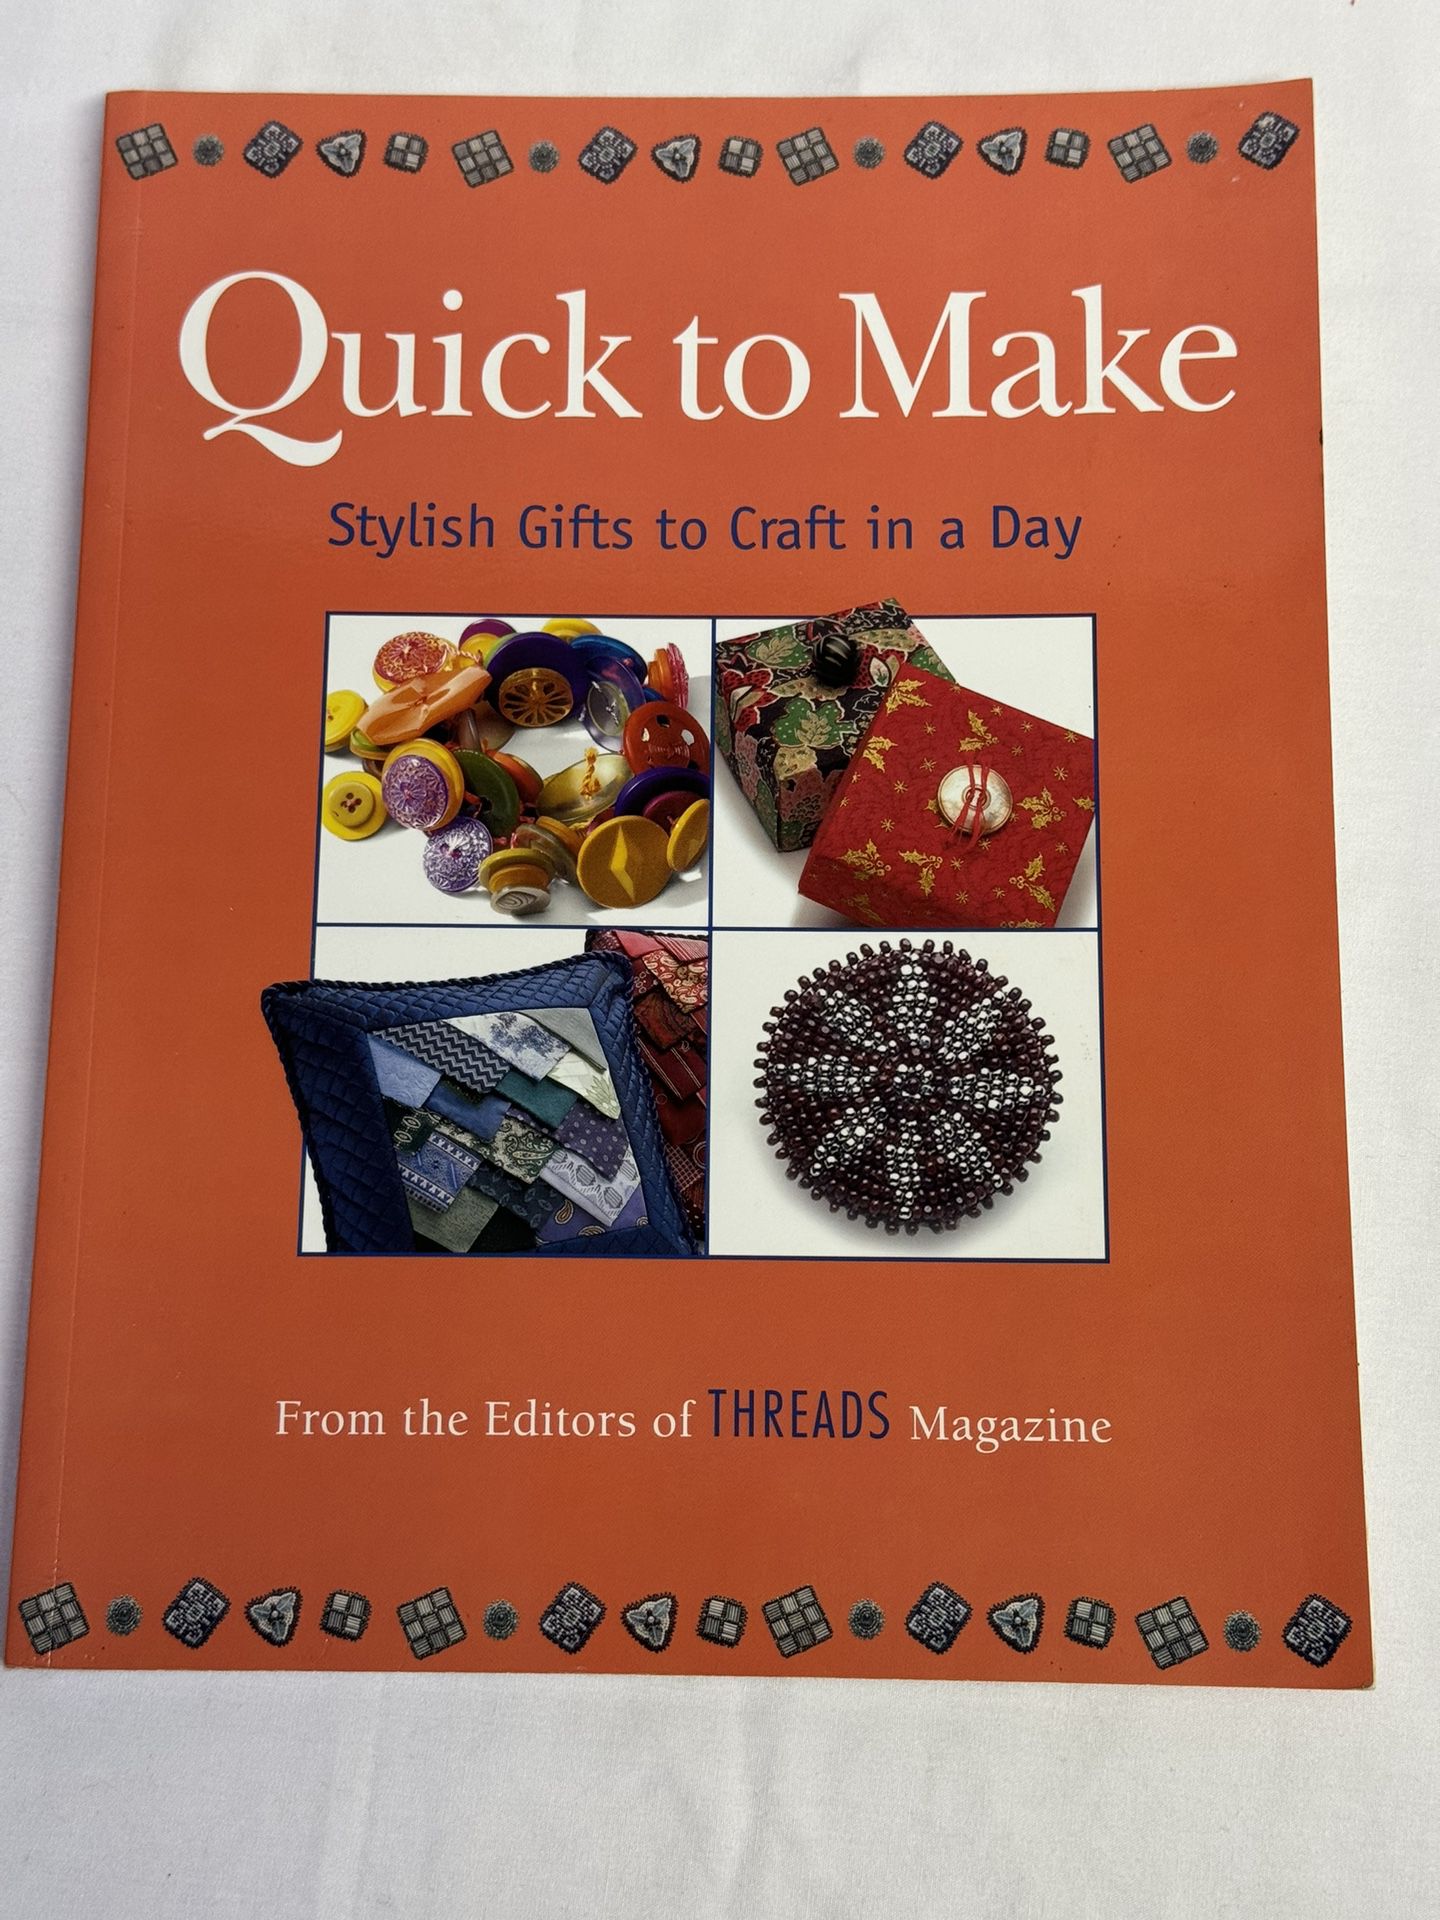 Book -Quick to Make Stylish Gifts to Craft in a Day.